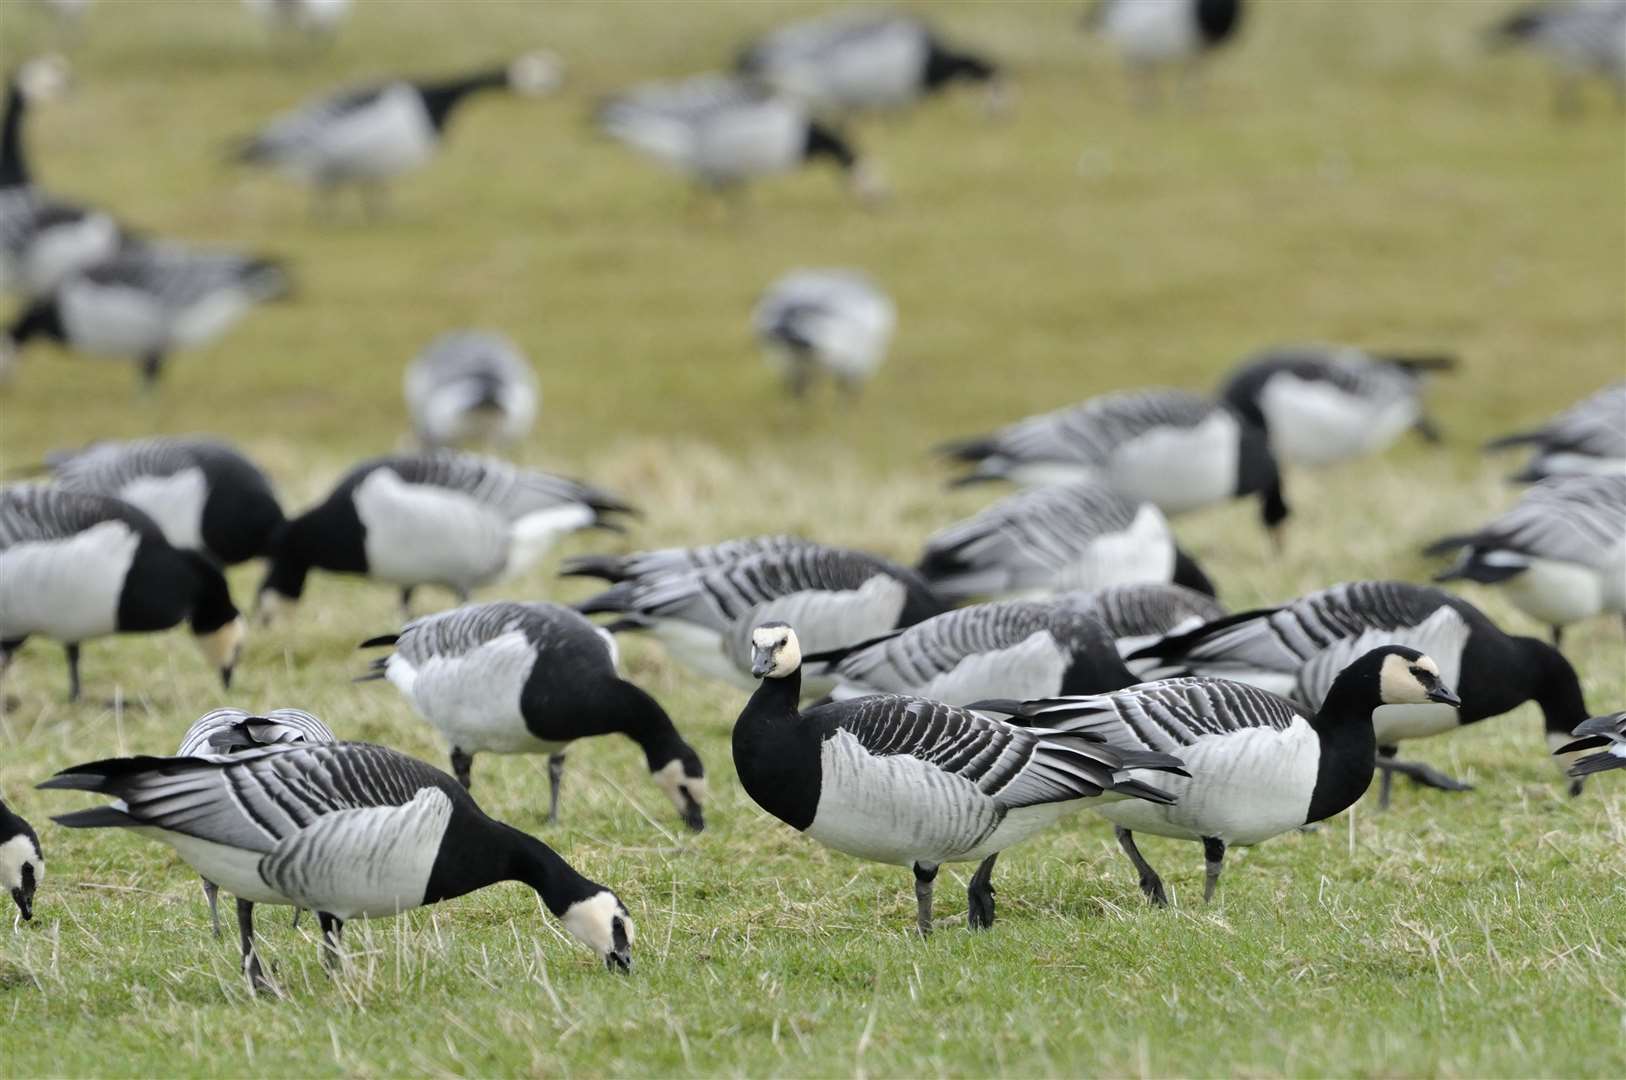 Barnacle geese (Branta leucopsis) are amongst those now being monitored. Picture: Lorne Gill.